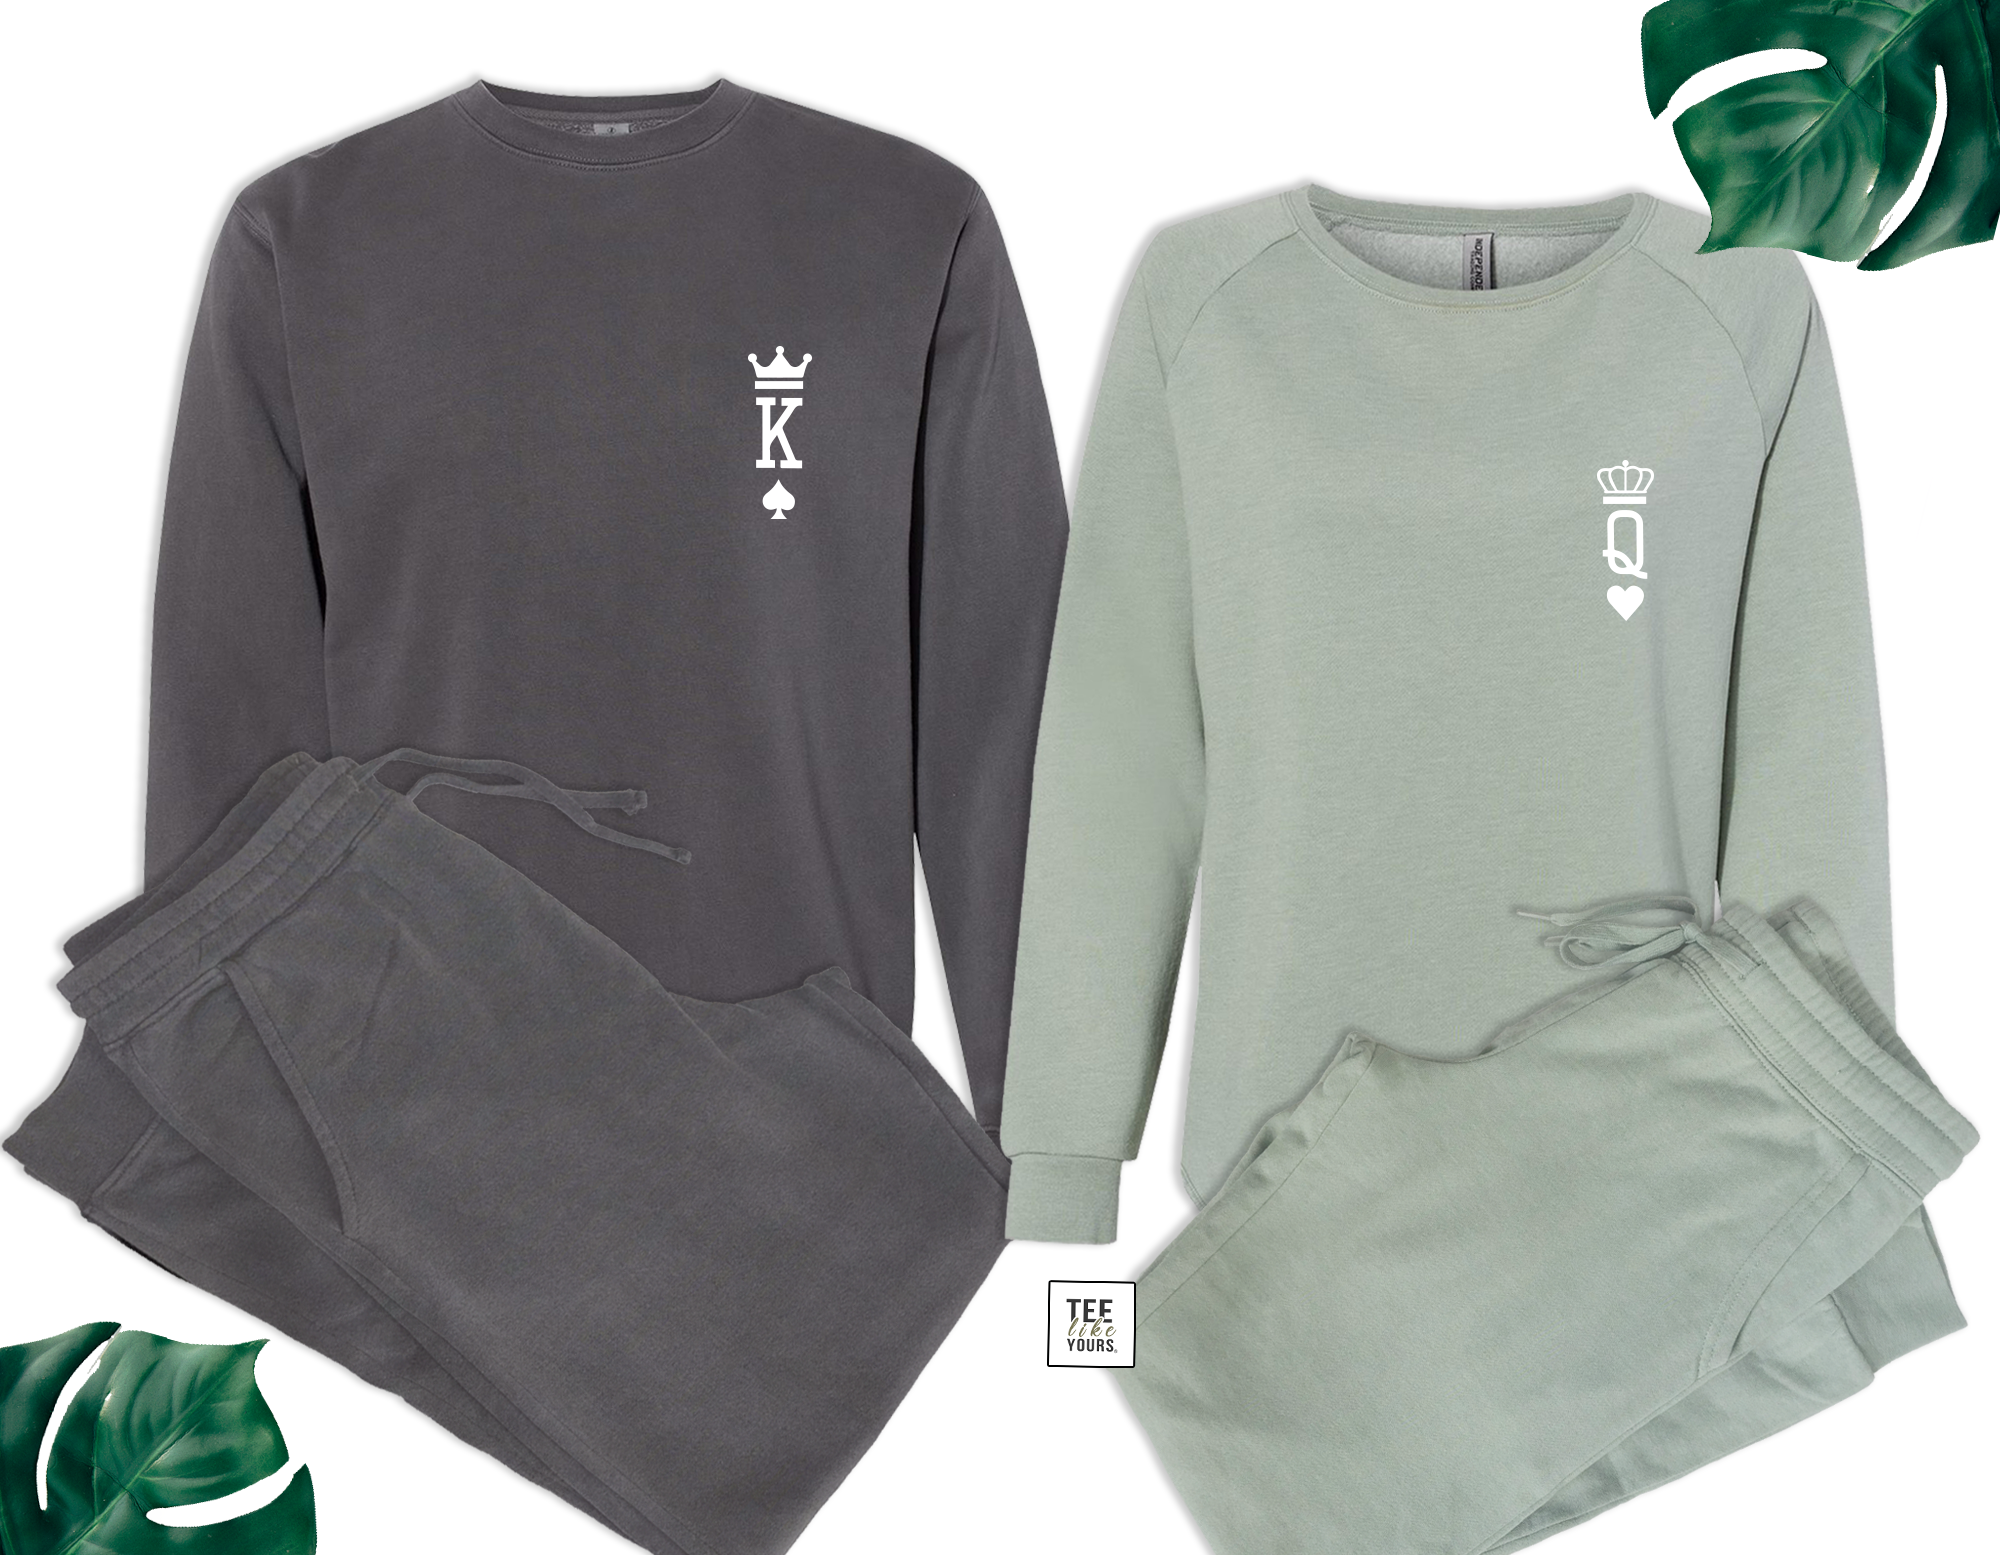 King & Queen Couple Matching Set - Sweatshirt and Sweatpants couple outfit  –